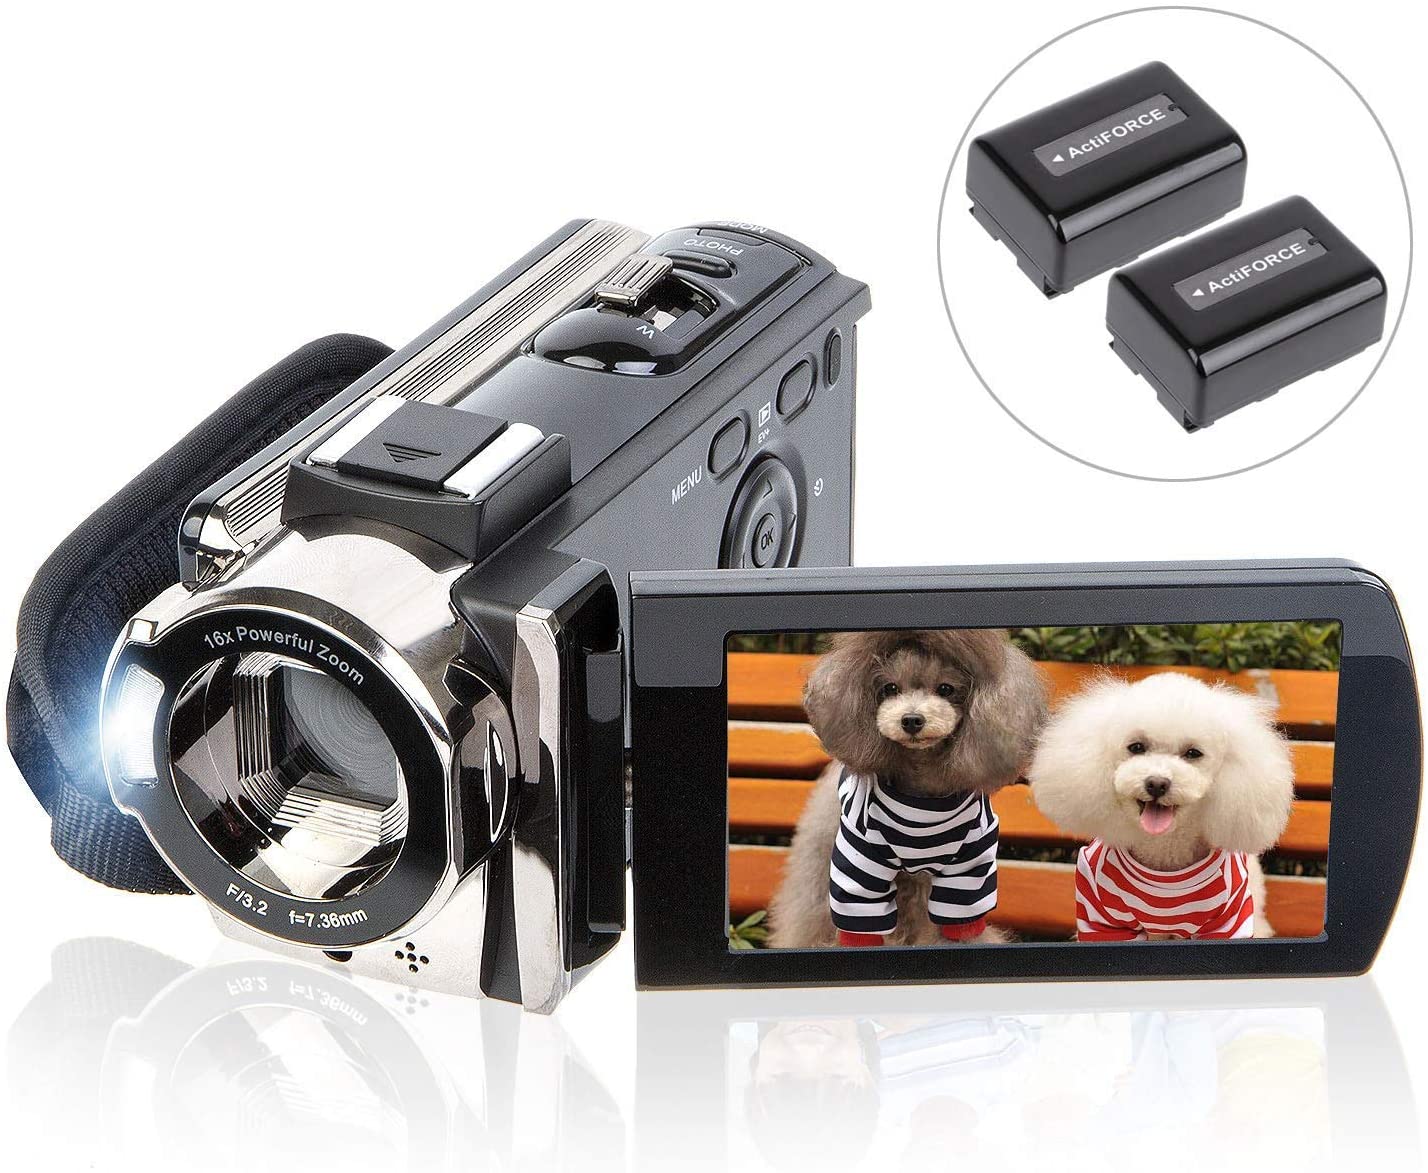 Video Camera Camcorder Digital Camera Recorder kicteck Full HD 1080P 15FPS 24MP 3.0 Inch 270 Degree Rotation LCD 16X Zoom Camcorder with 2 Batteries(604s) - image 1 of 8